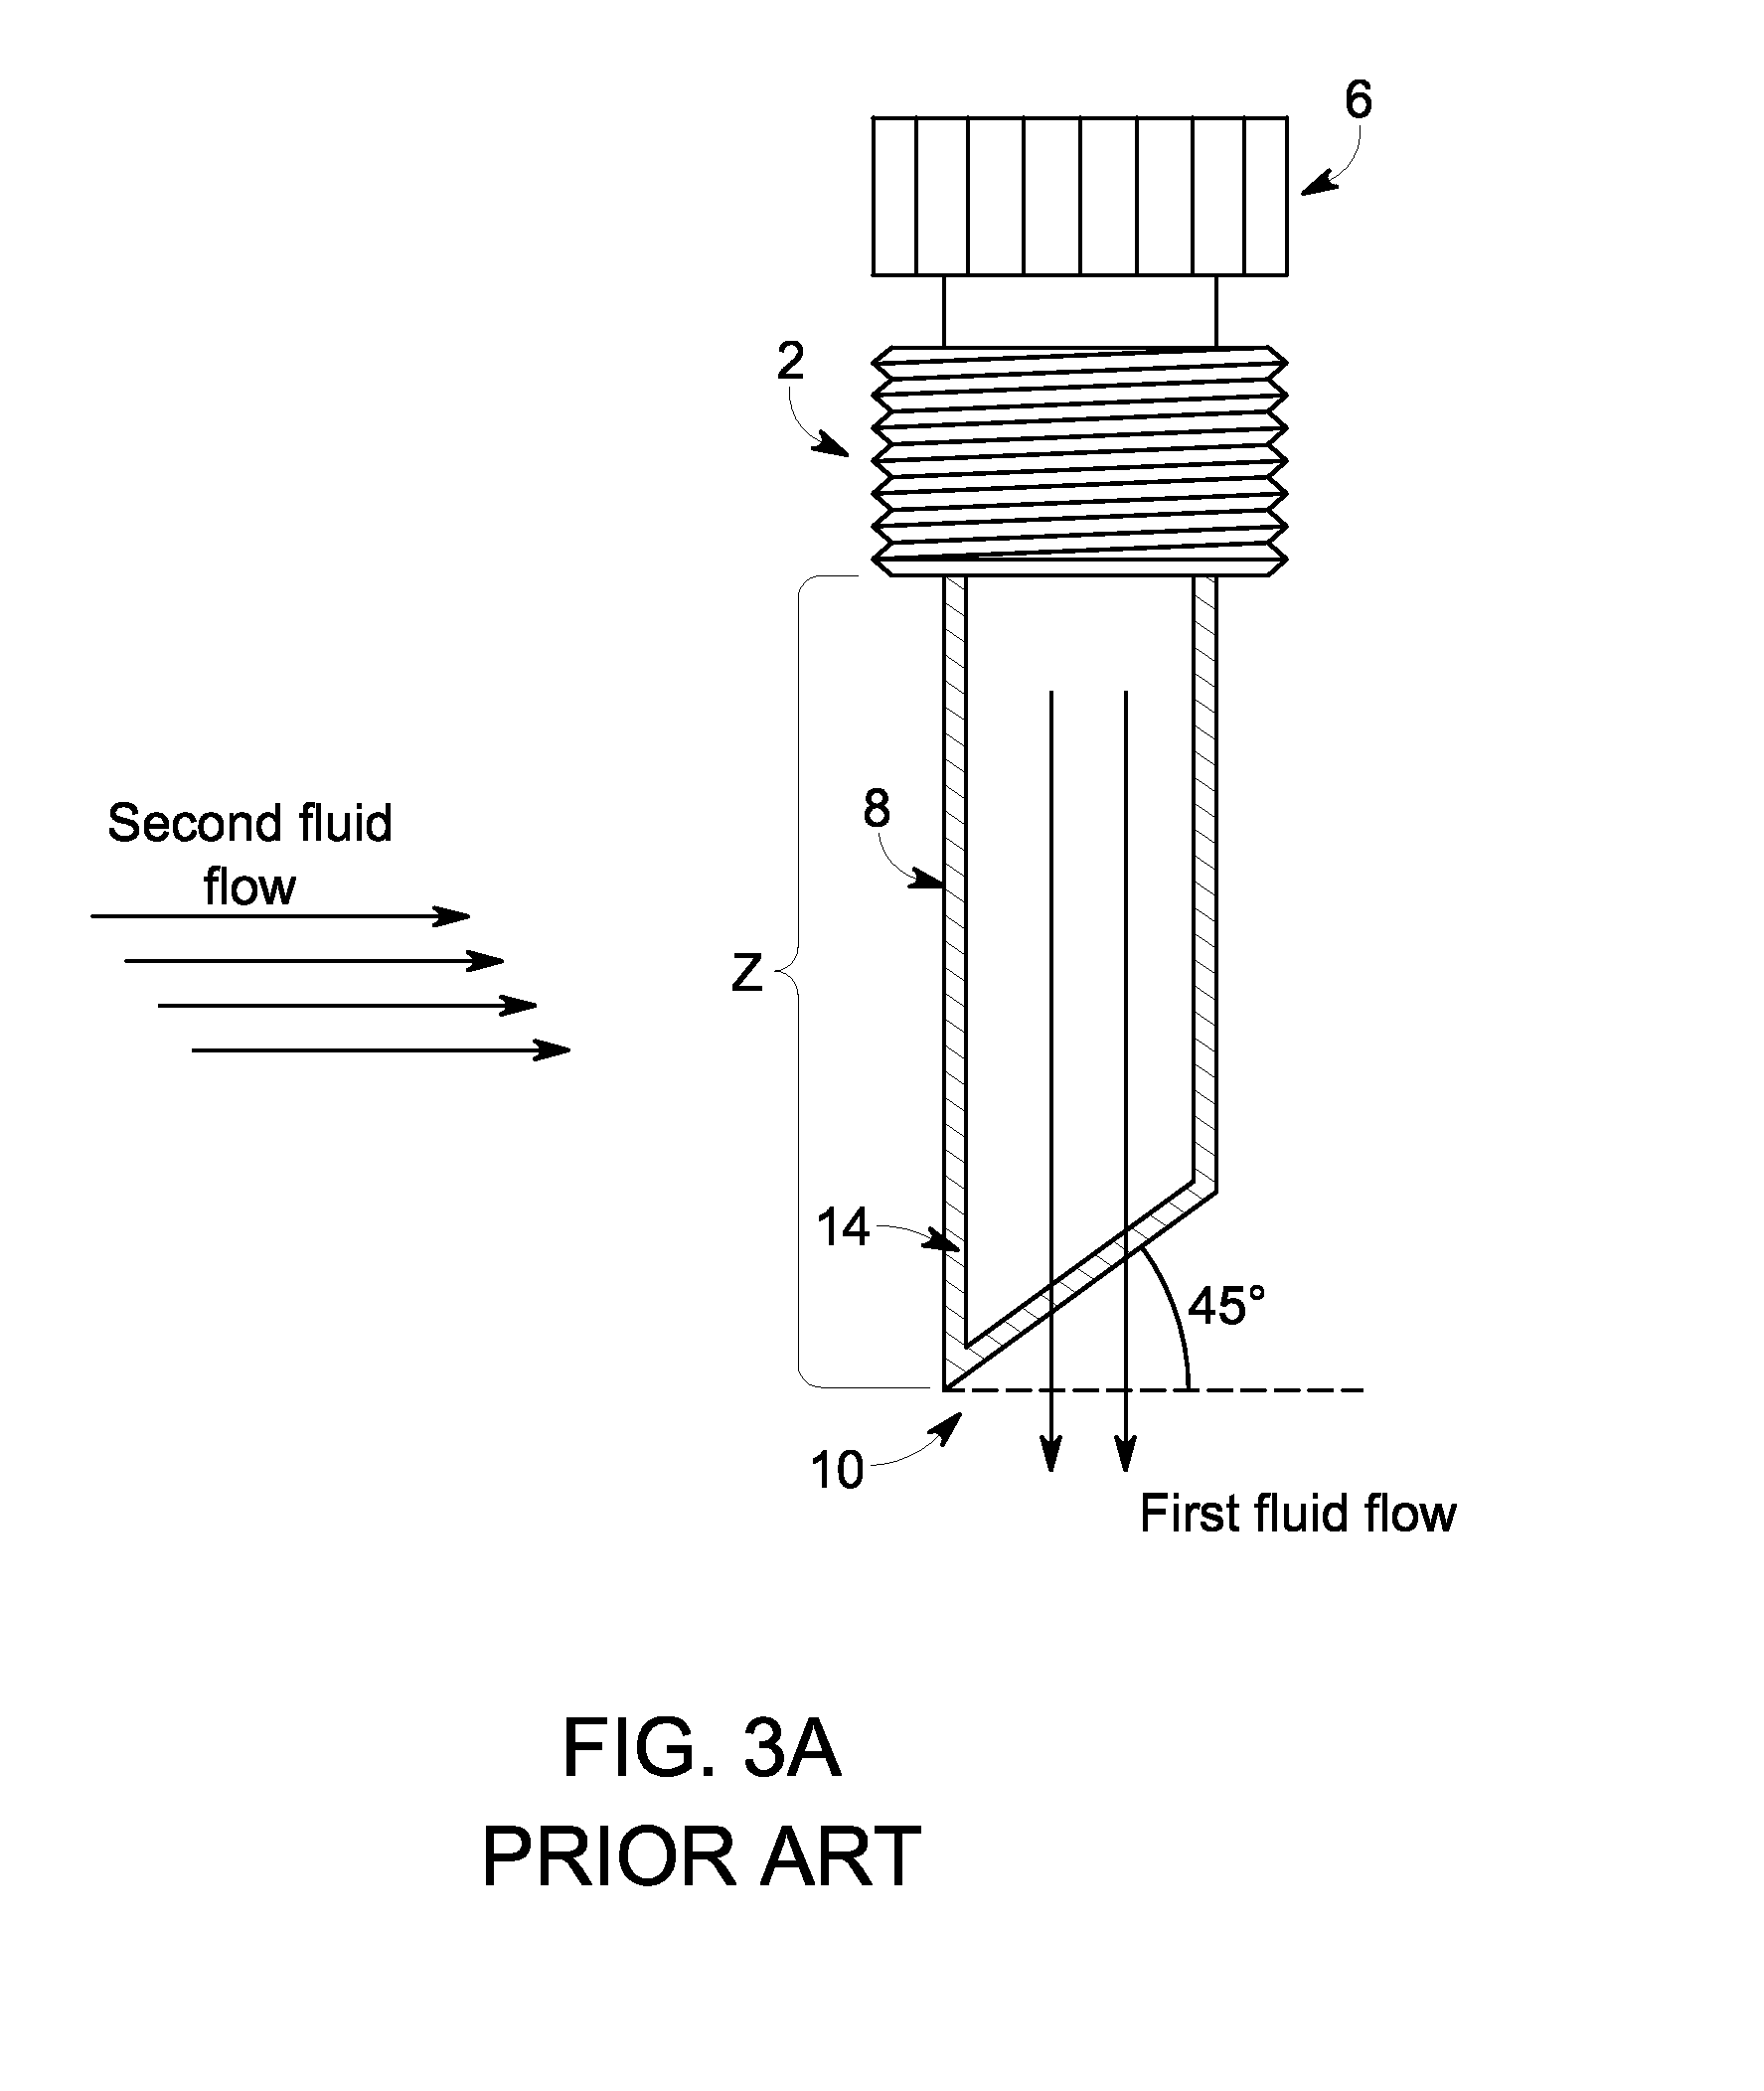 Injection quill designs and methods of use